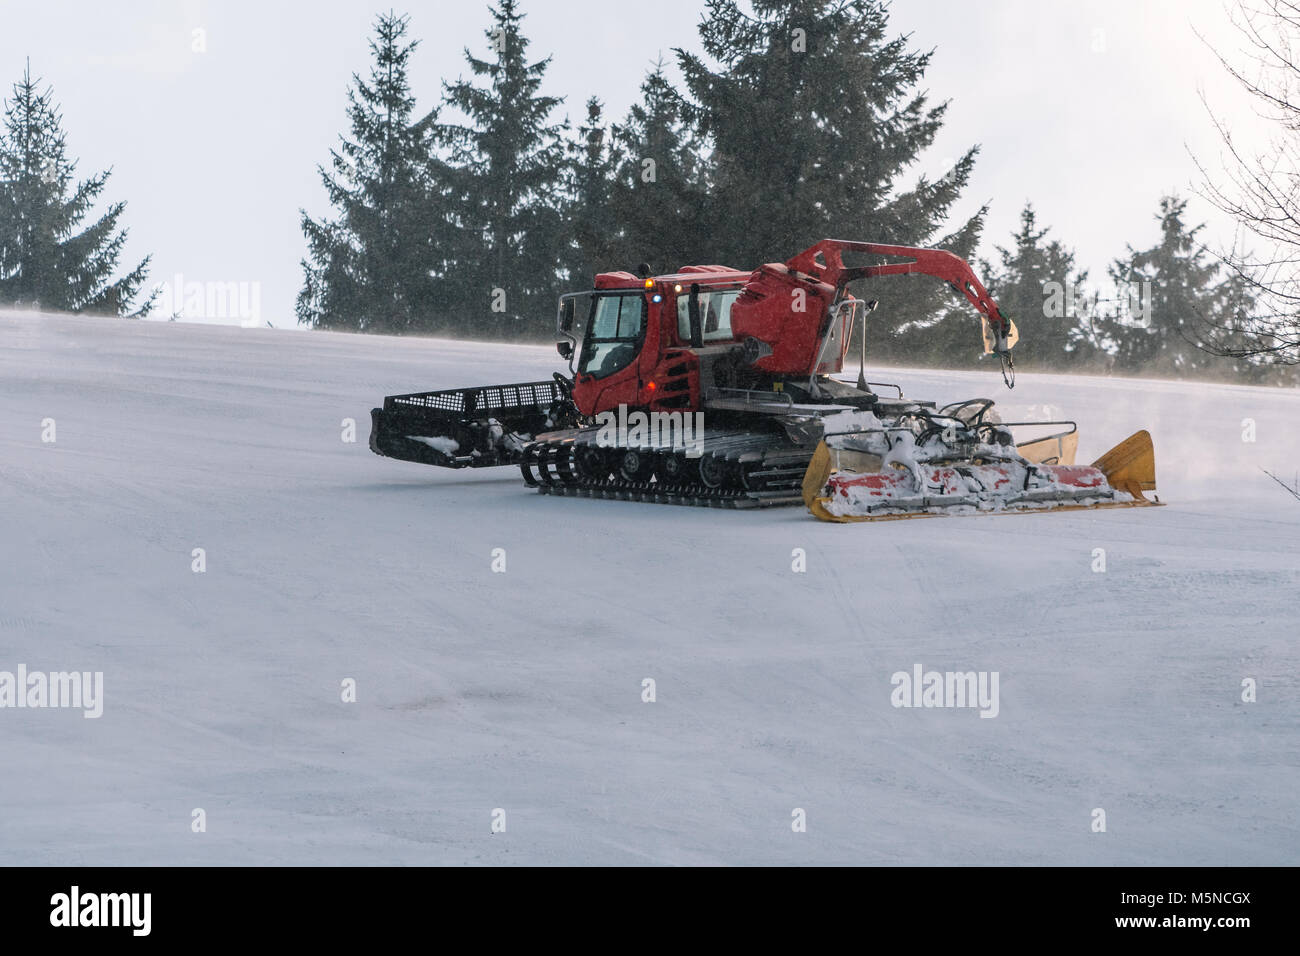 Red snowcat on snow in the winter in mountains. Ratrack improving or maintaining a ski slope. Snowing. Stock Photo